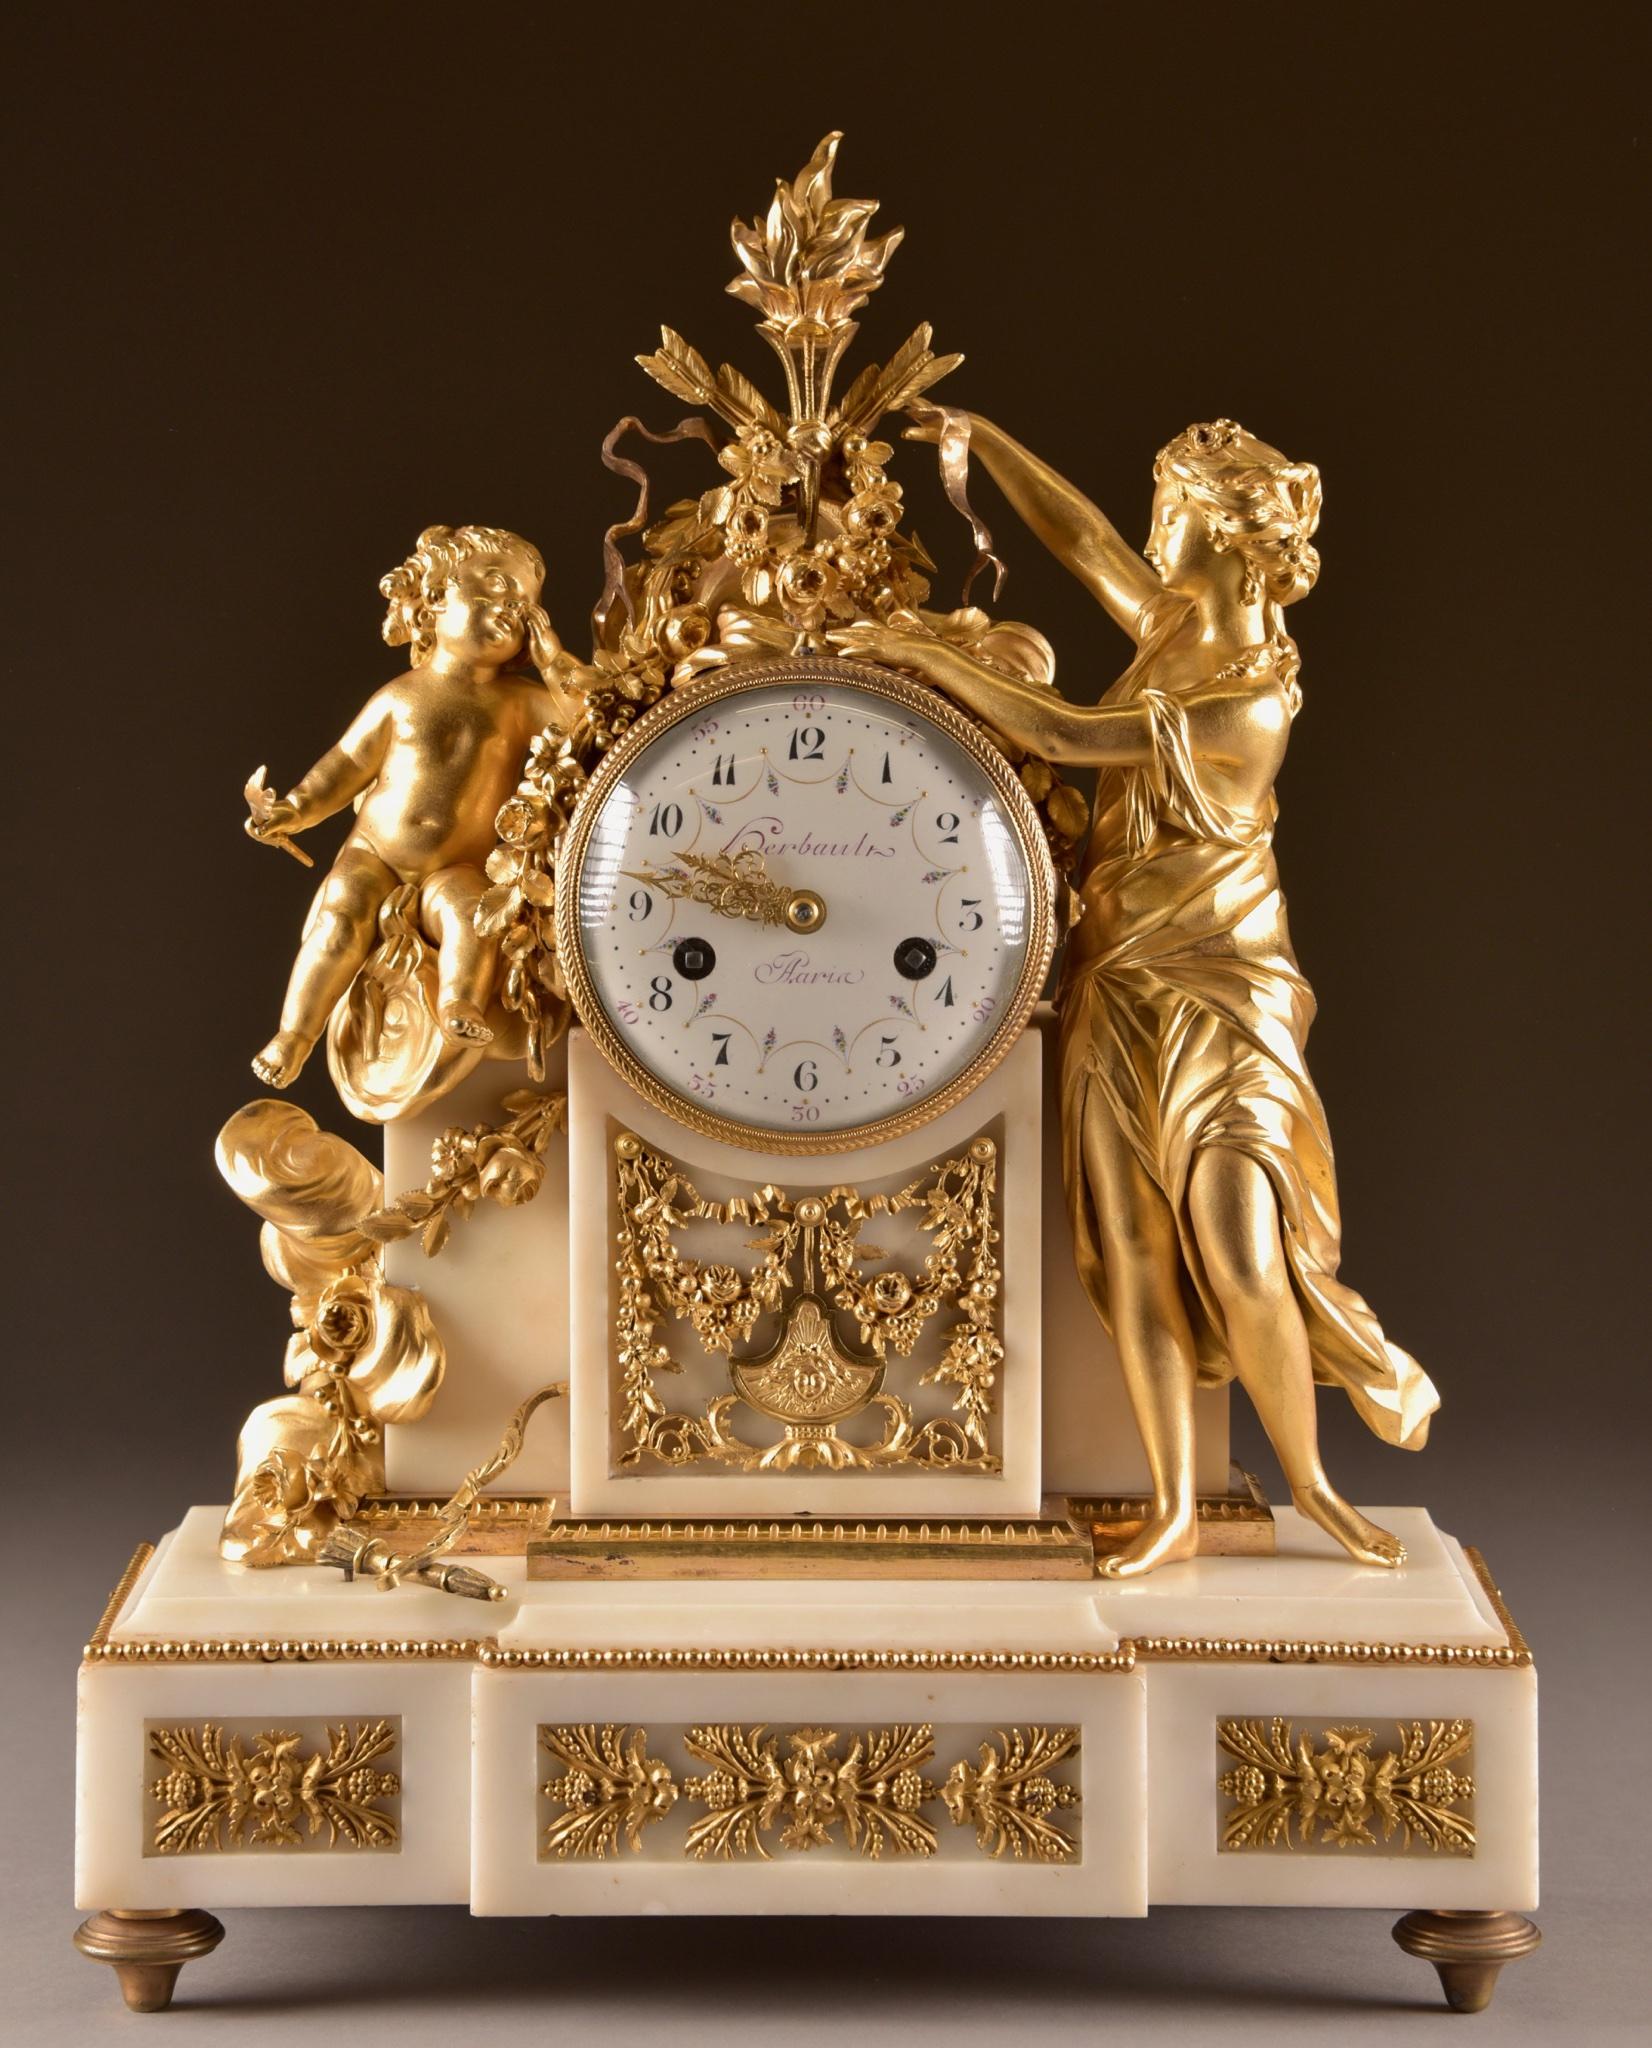 Very nice large and heavy Louis XVI pendulum. With beautiful images of Venus (Goddess of love) and a Cherub. known from the book: Die Französische Bronzeuhr!, pag.131.

This clock comes with a key and a pendulum. Clockwork has recently been checked